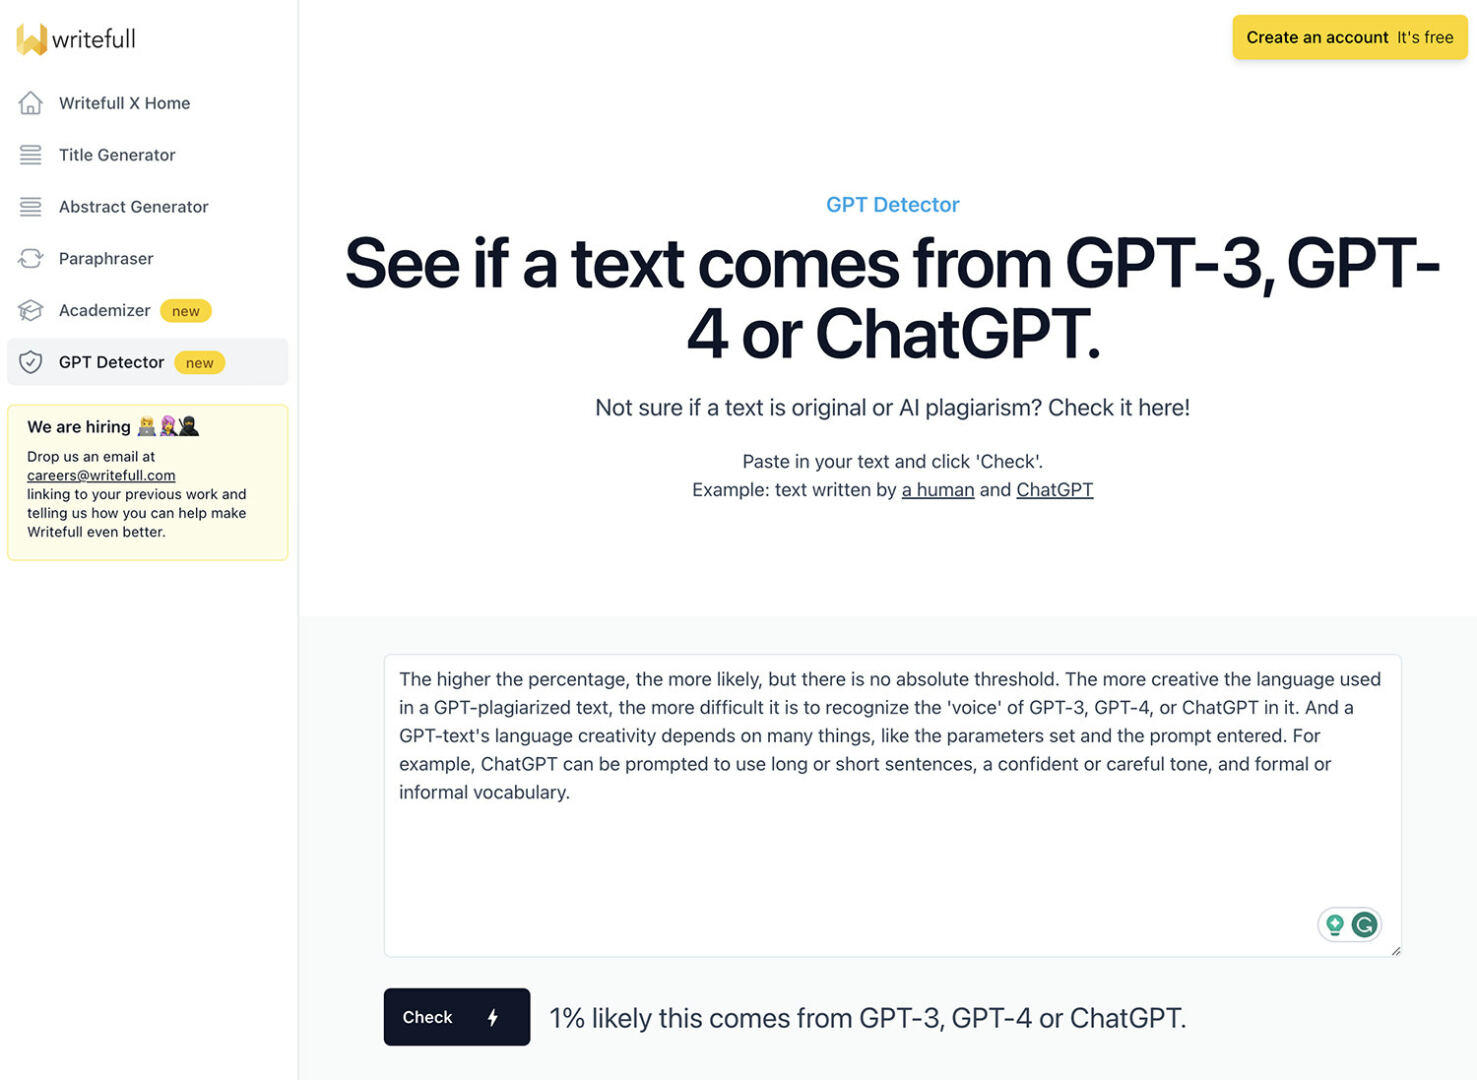 GPT Detector by Writefull